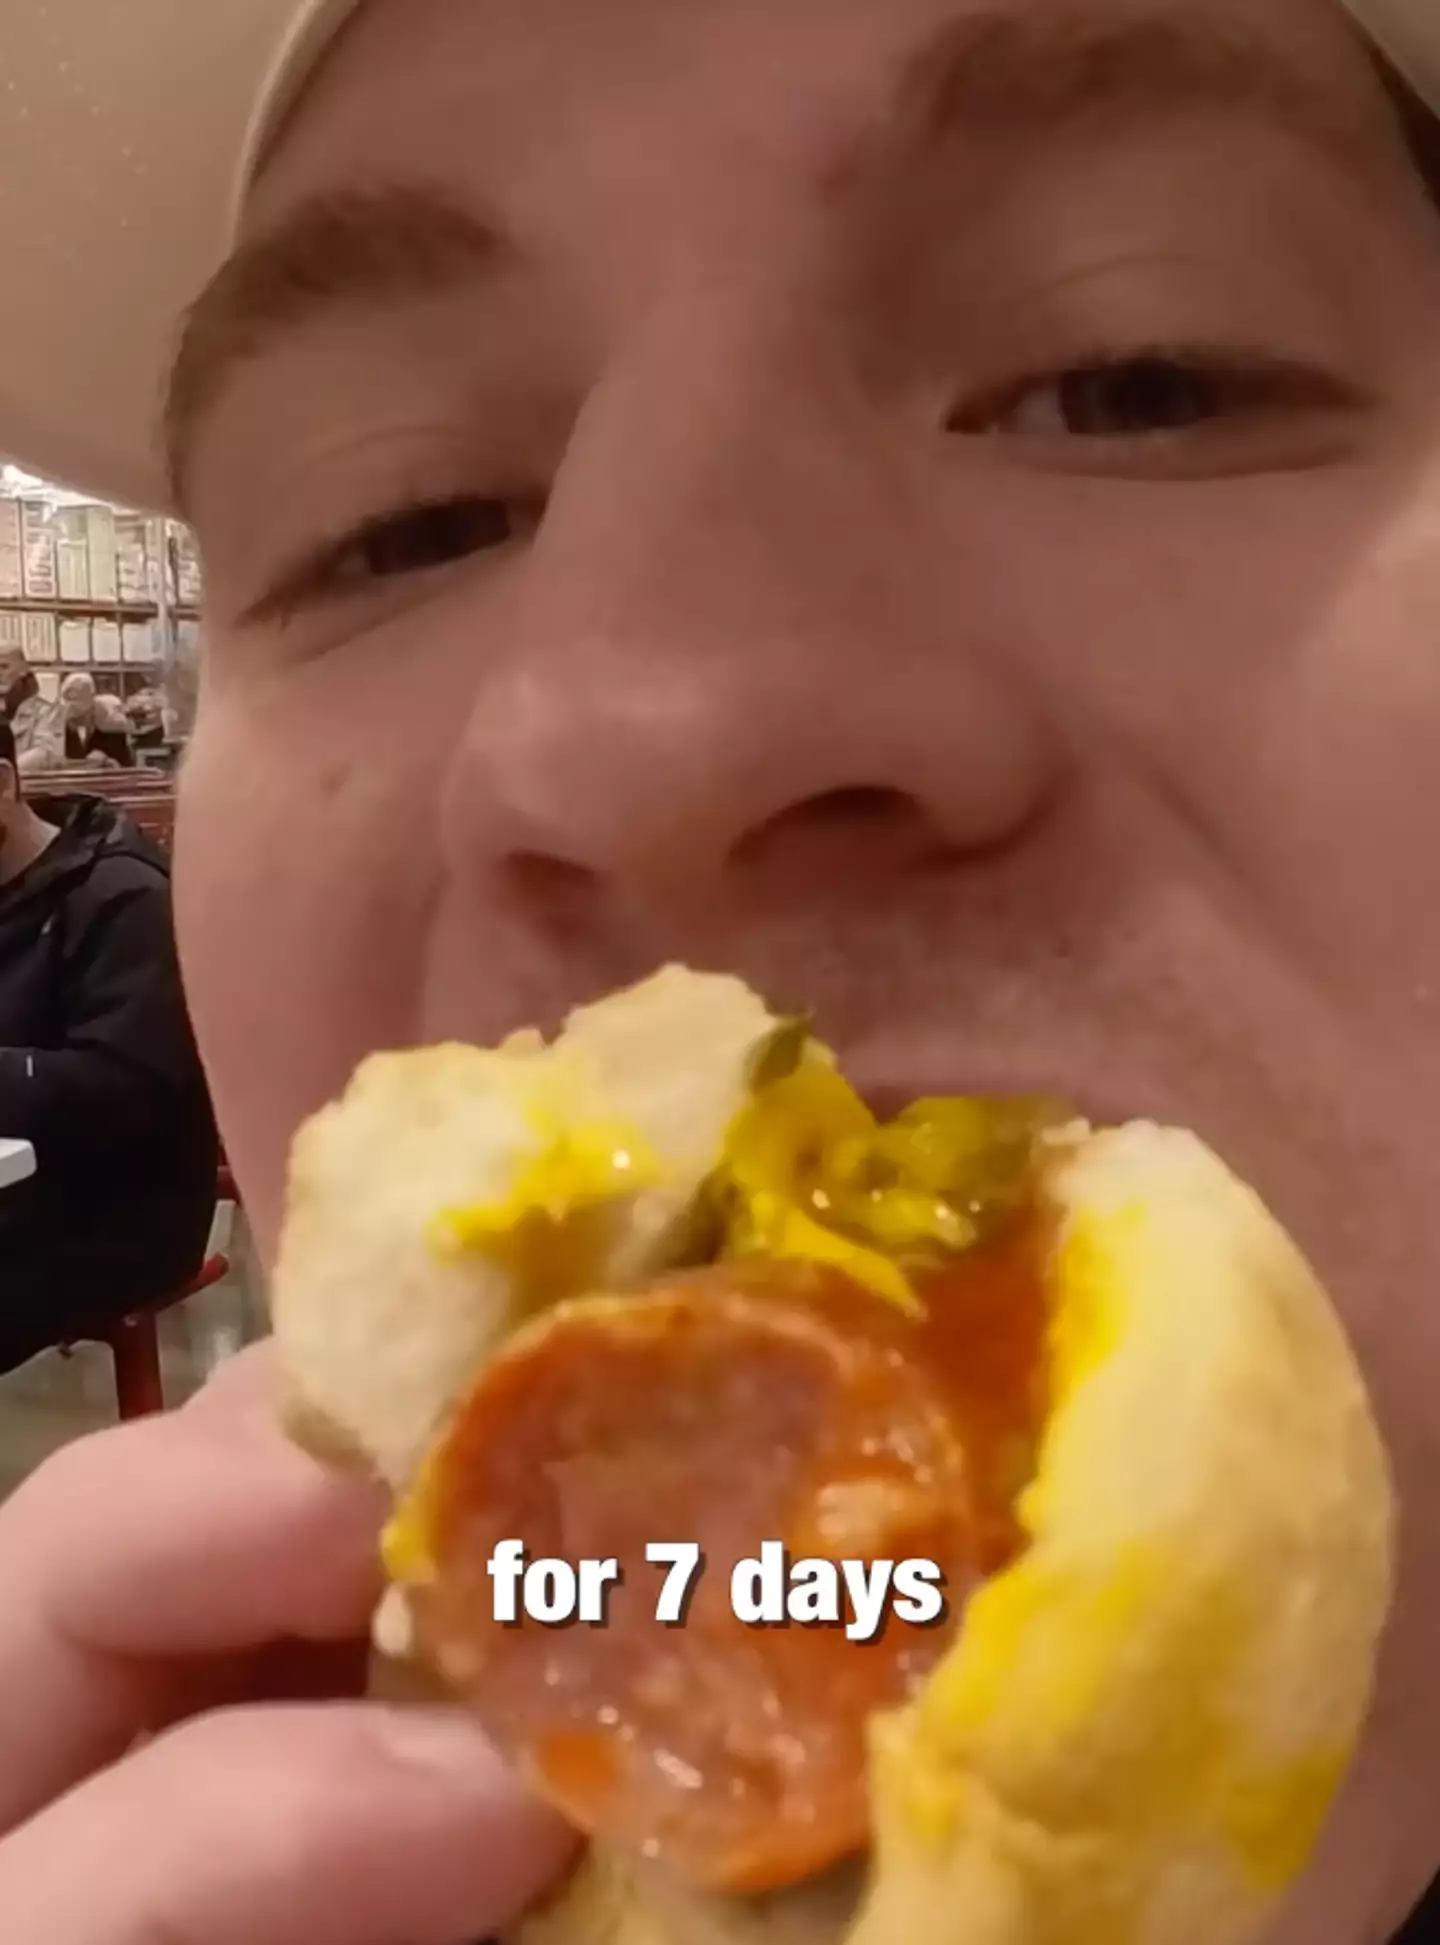 Would you eat only hot dogs for a week to save some cash?